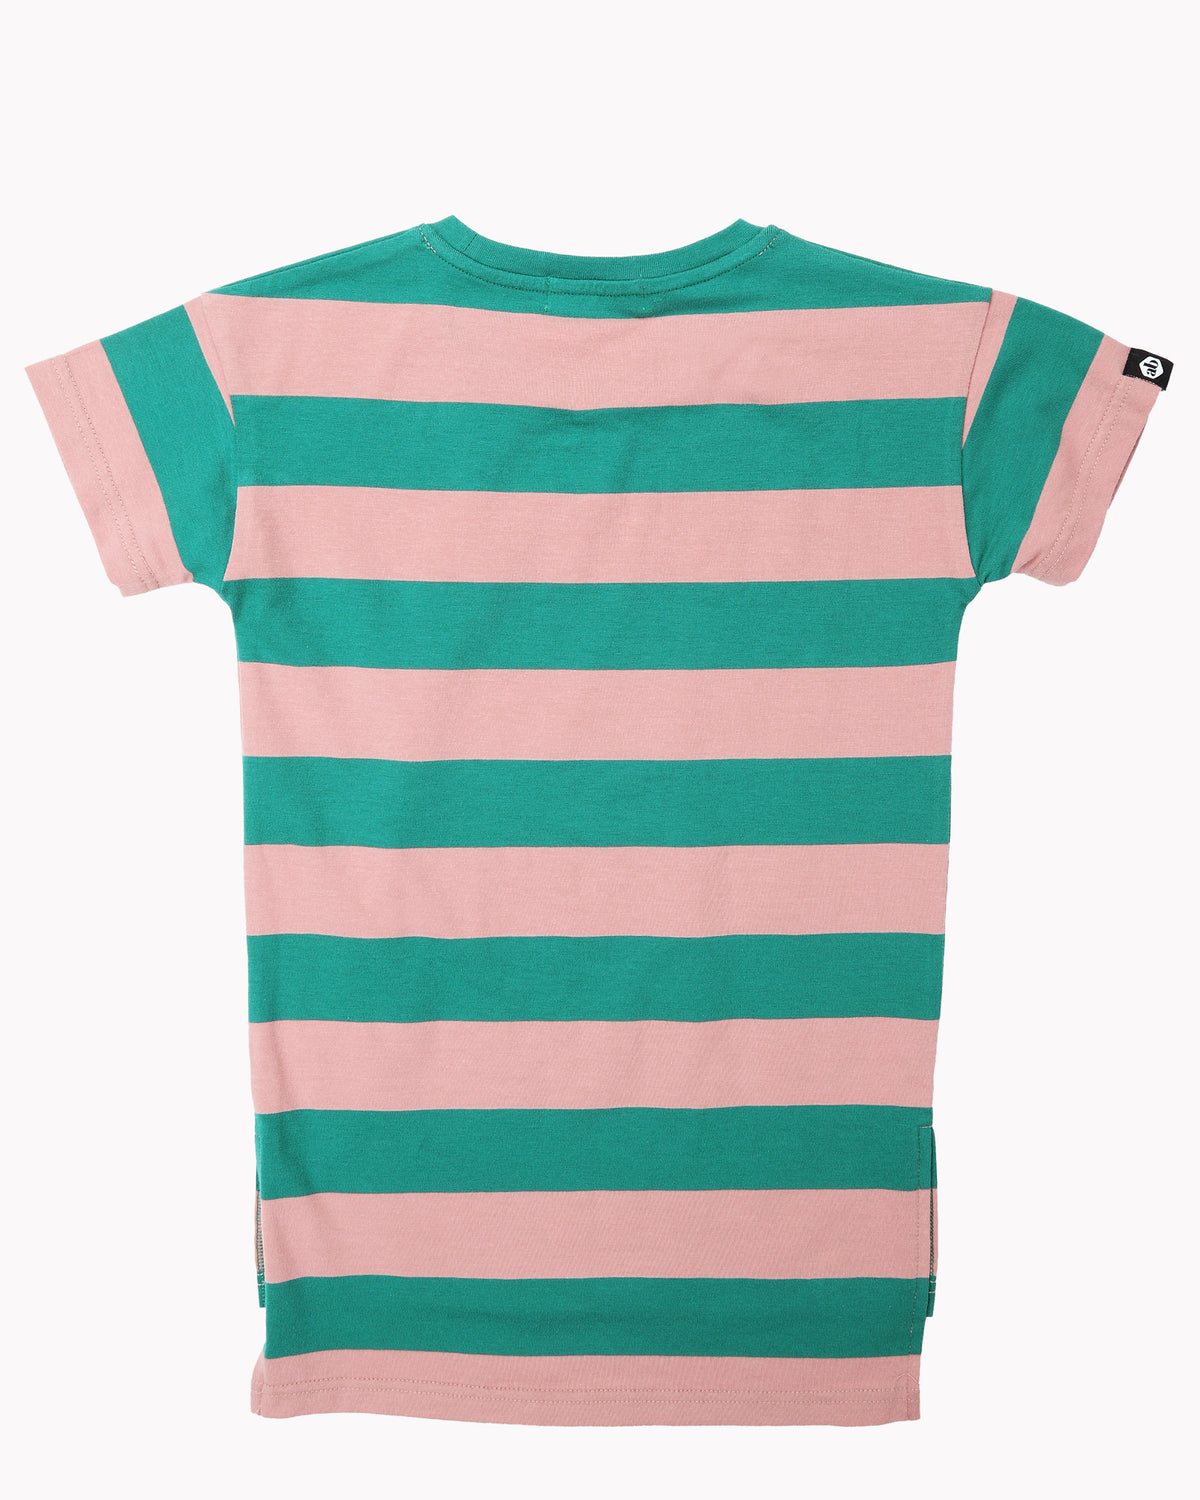 Wide Stripes T-Shirt Dress In Green and Salmon Back